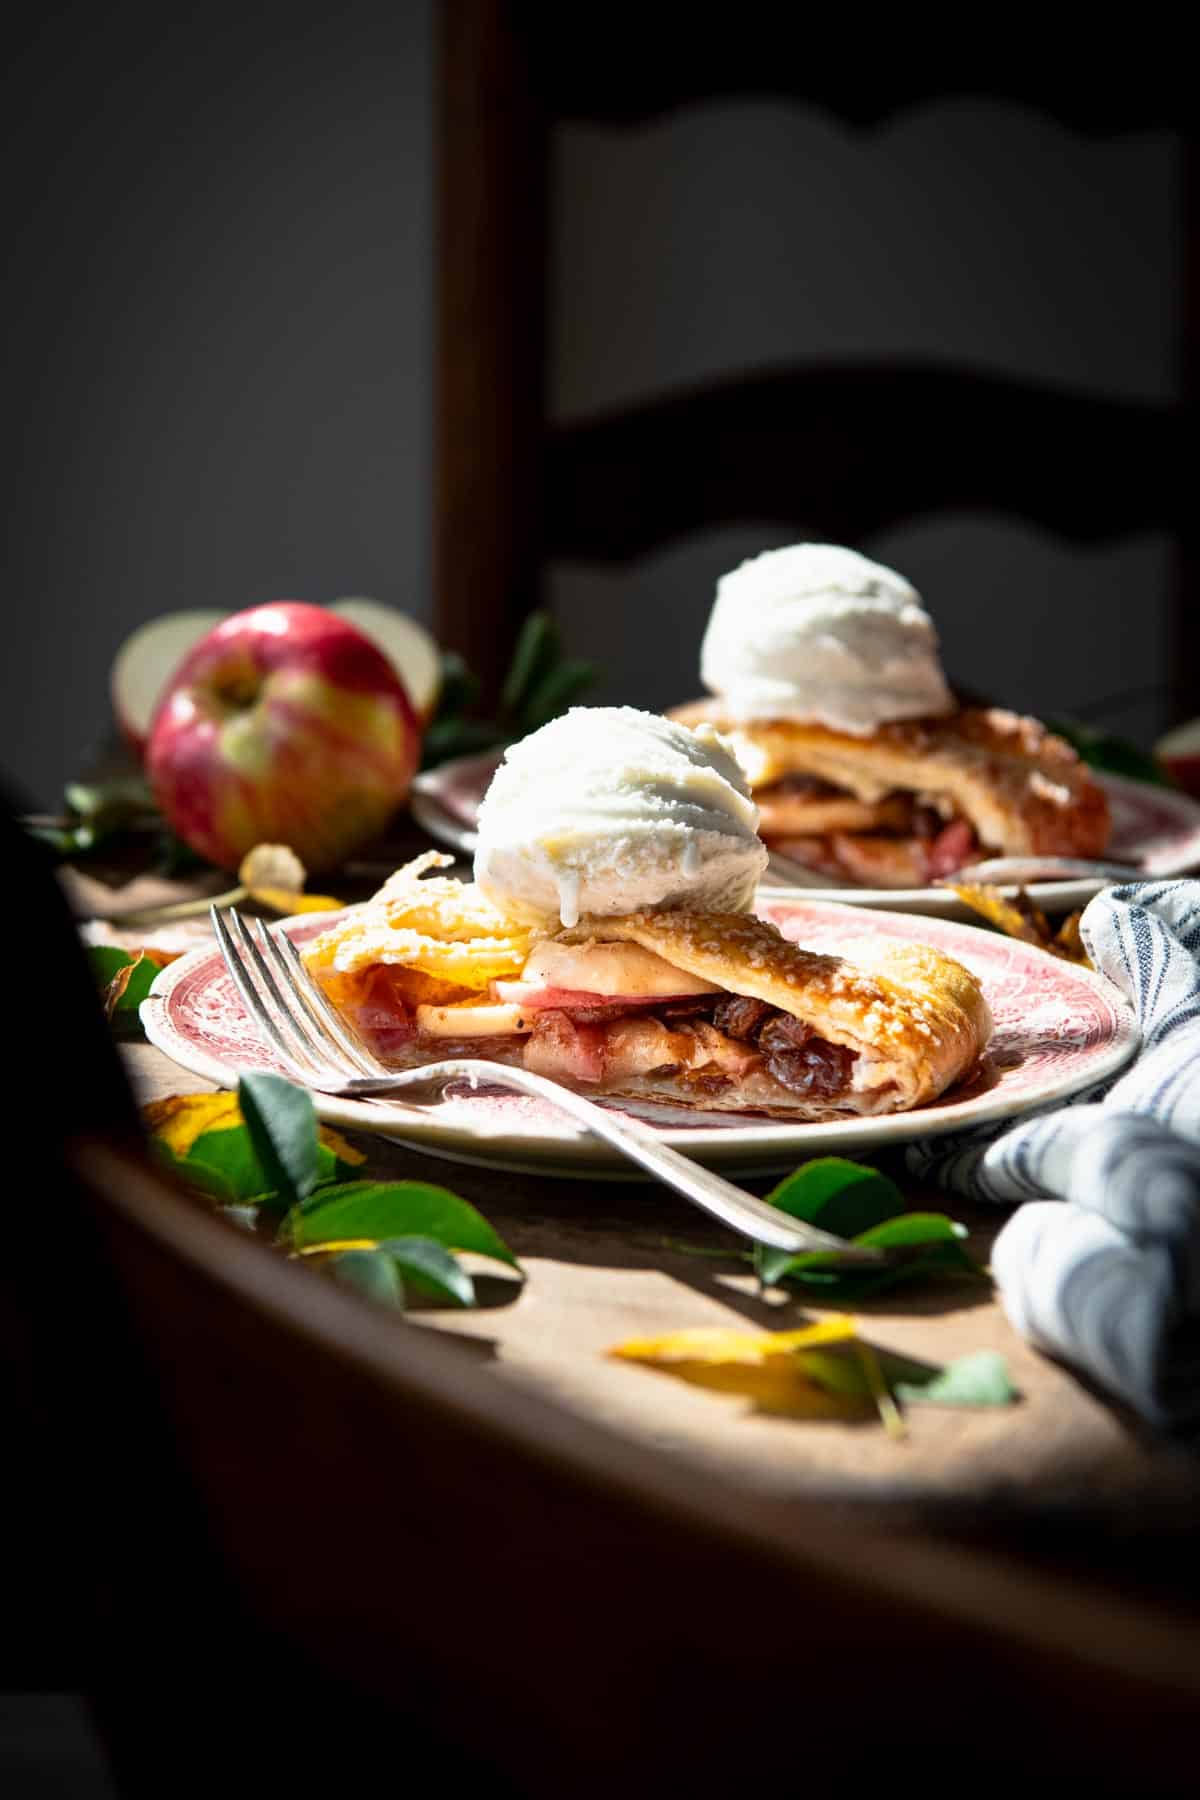 Ray of sunlight streaming in on a plate of easy apple strudel recipe.